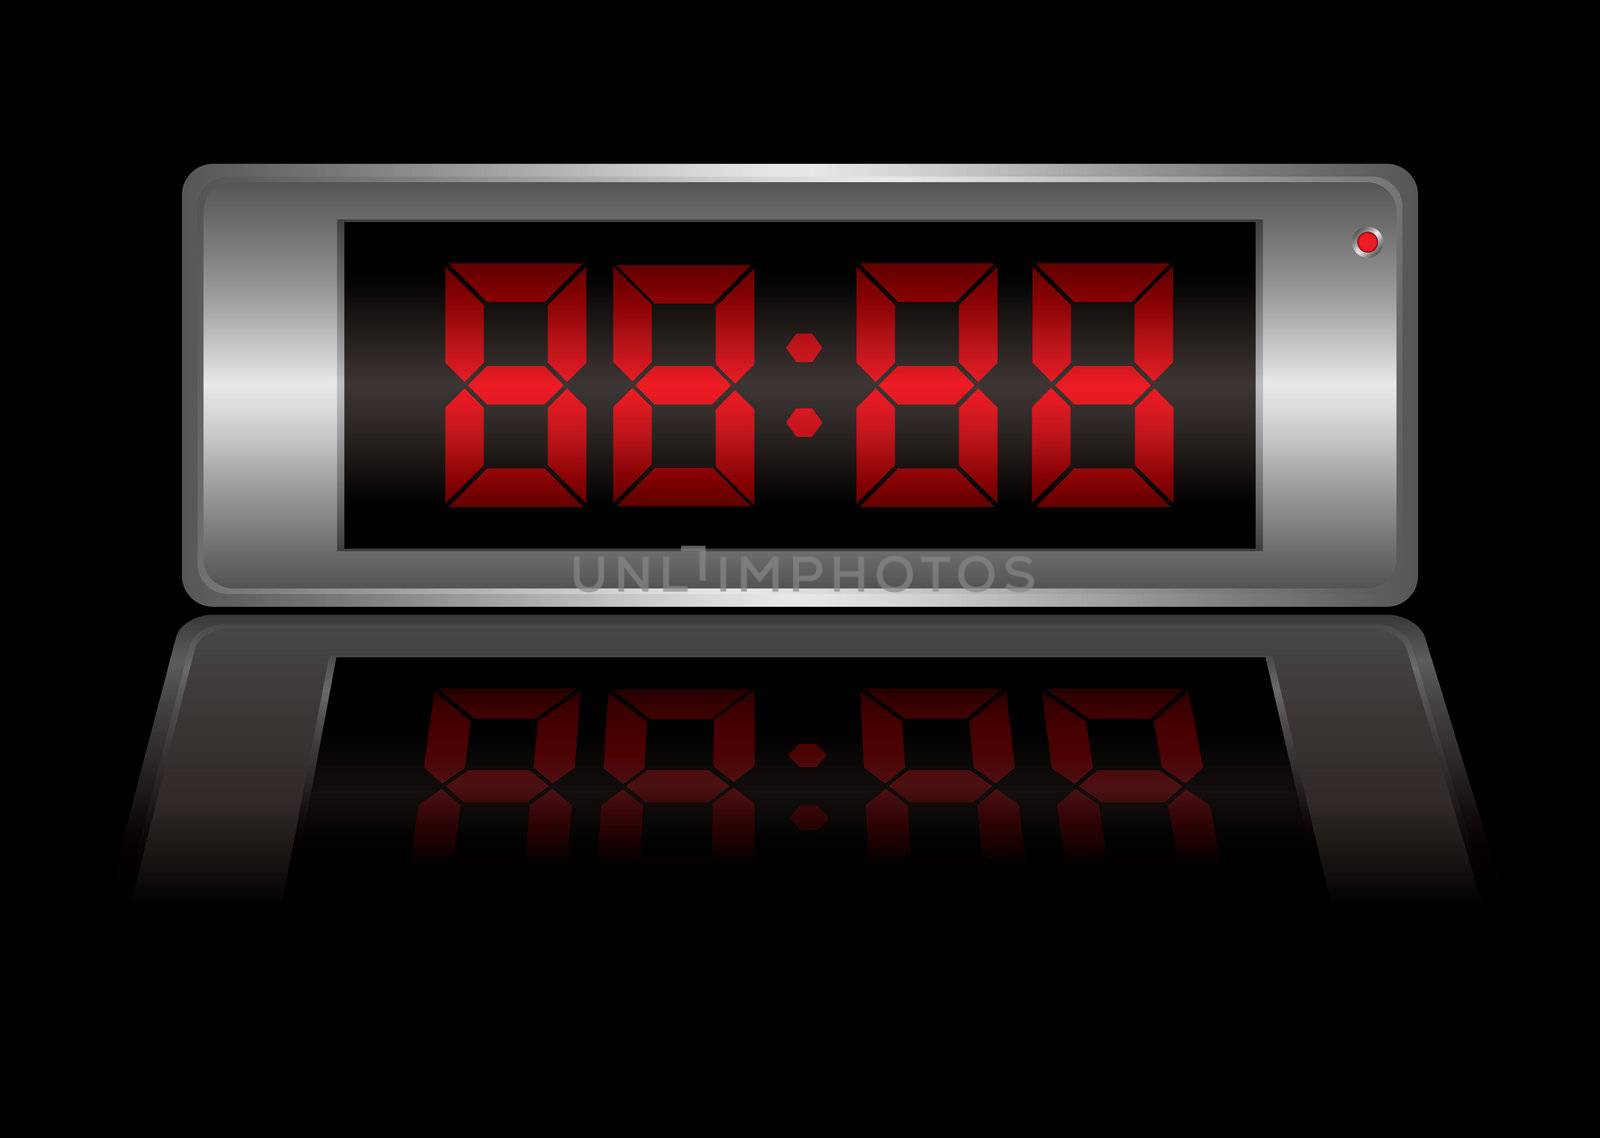 Blank digital alarm clock that you can change to any time you want
